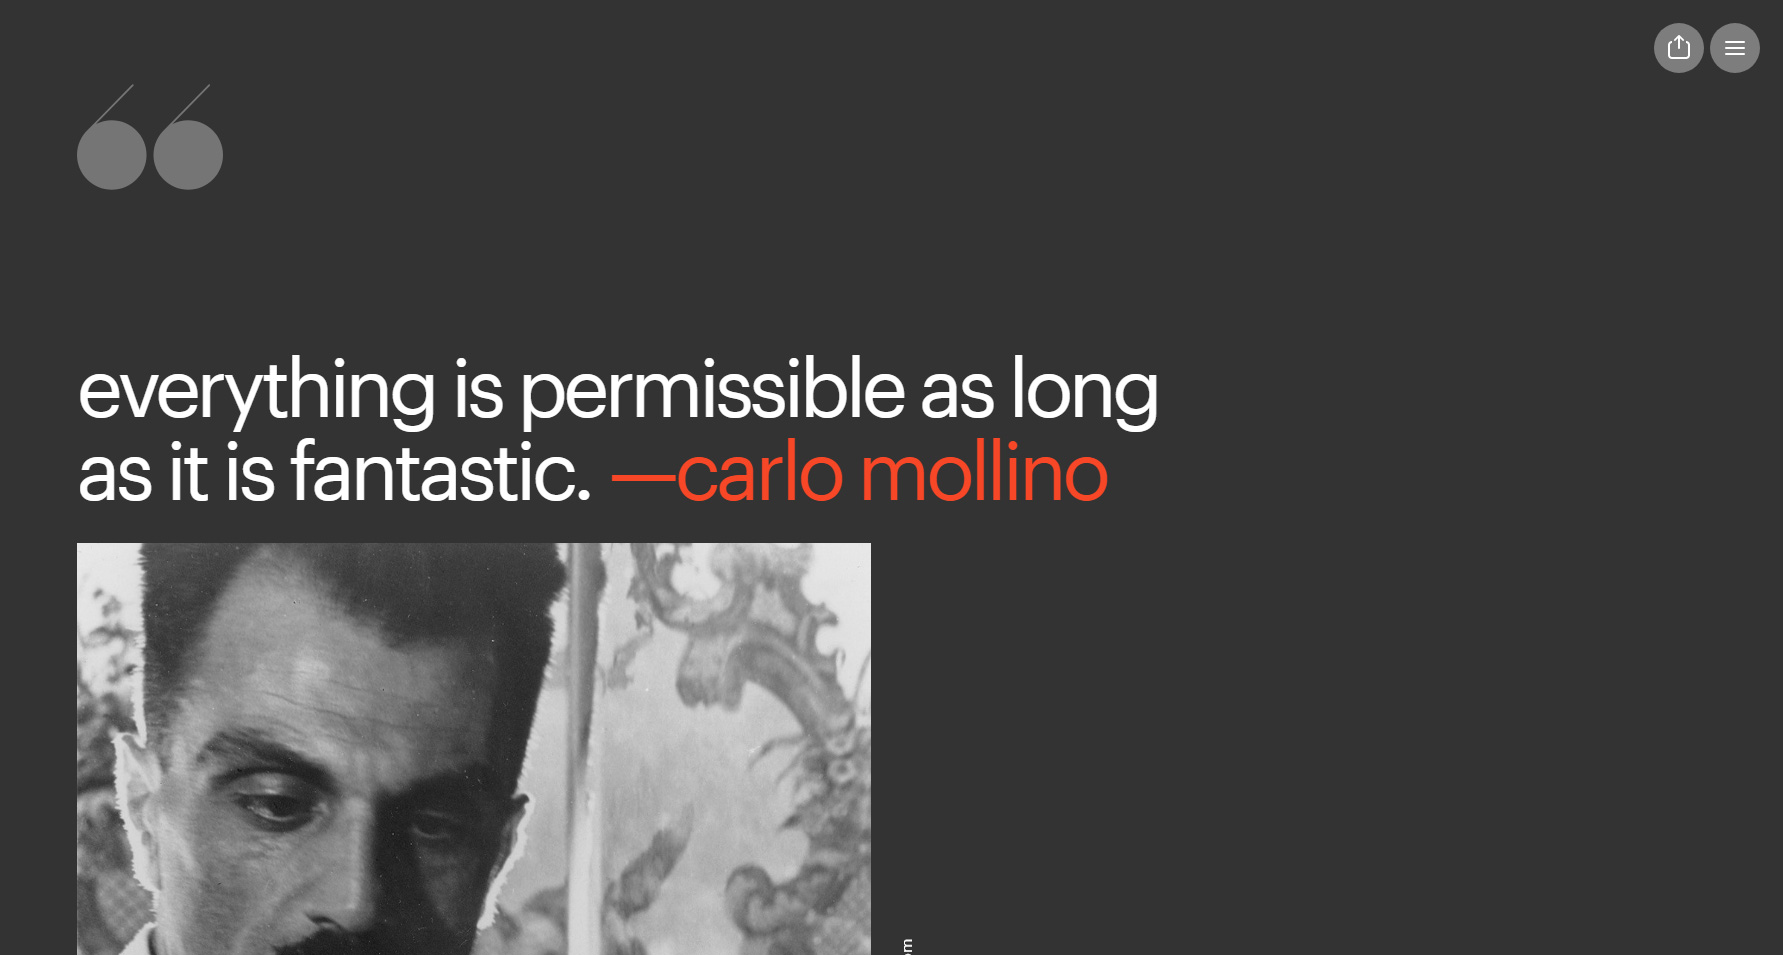 Carlo Mollino by Readymag - Website of the Day